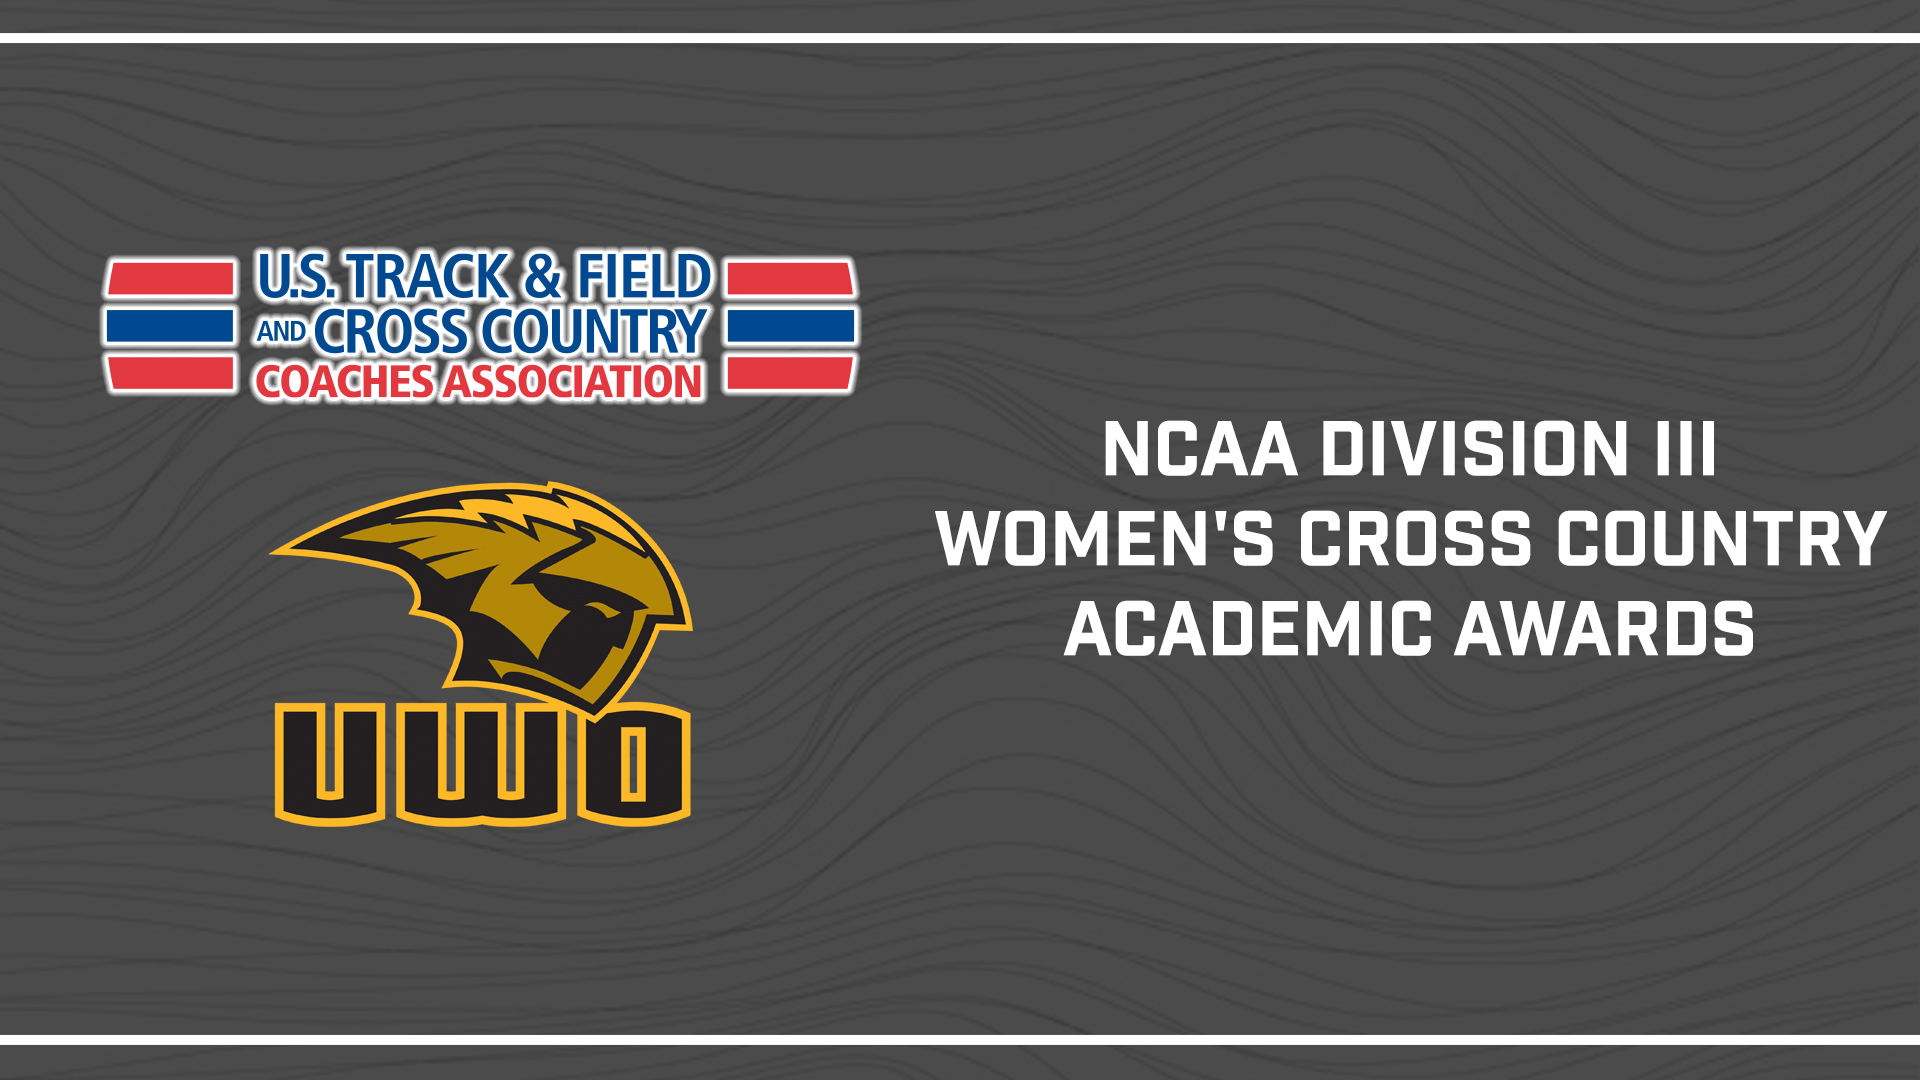 Women’s Cross Country Program Cited For Academic Success